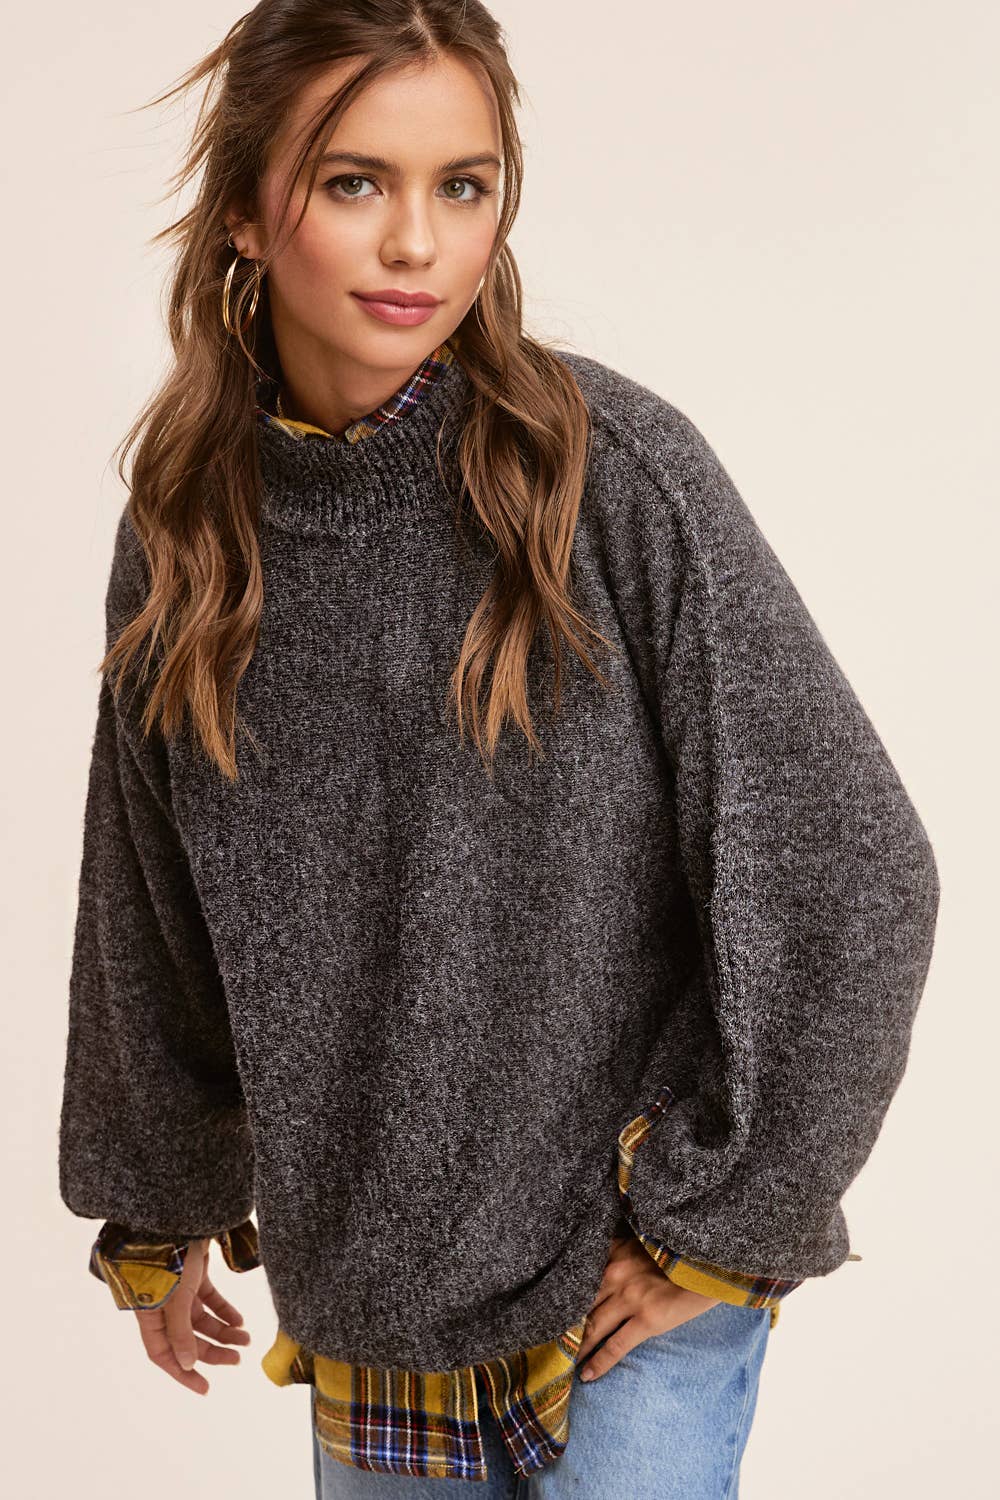 Balloon Sleeves Fall Winter Sweater: Charcoal Black